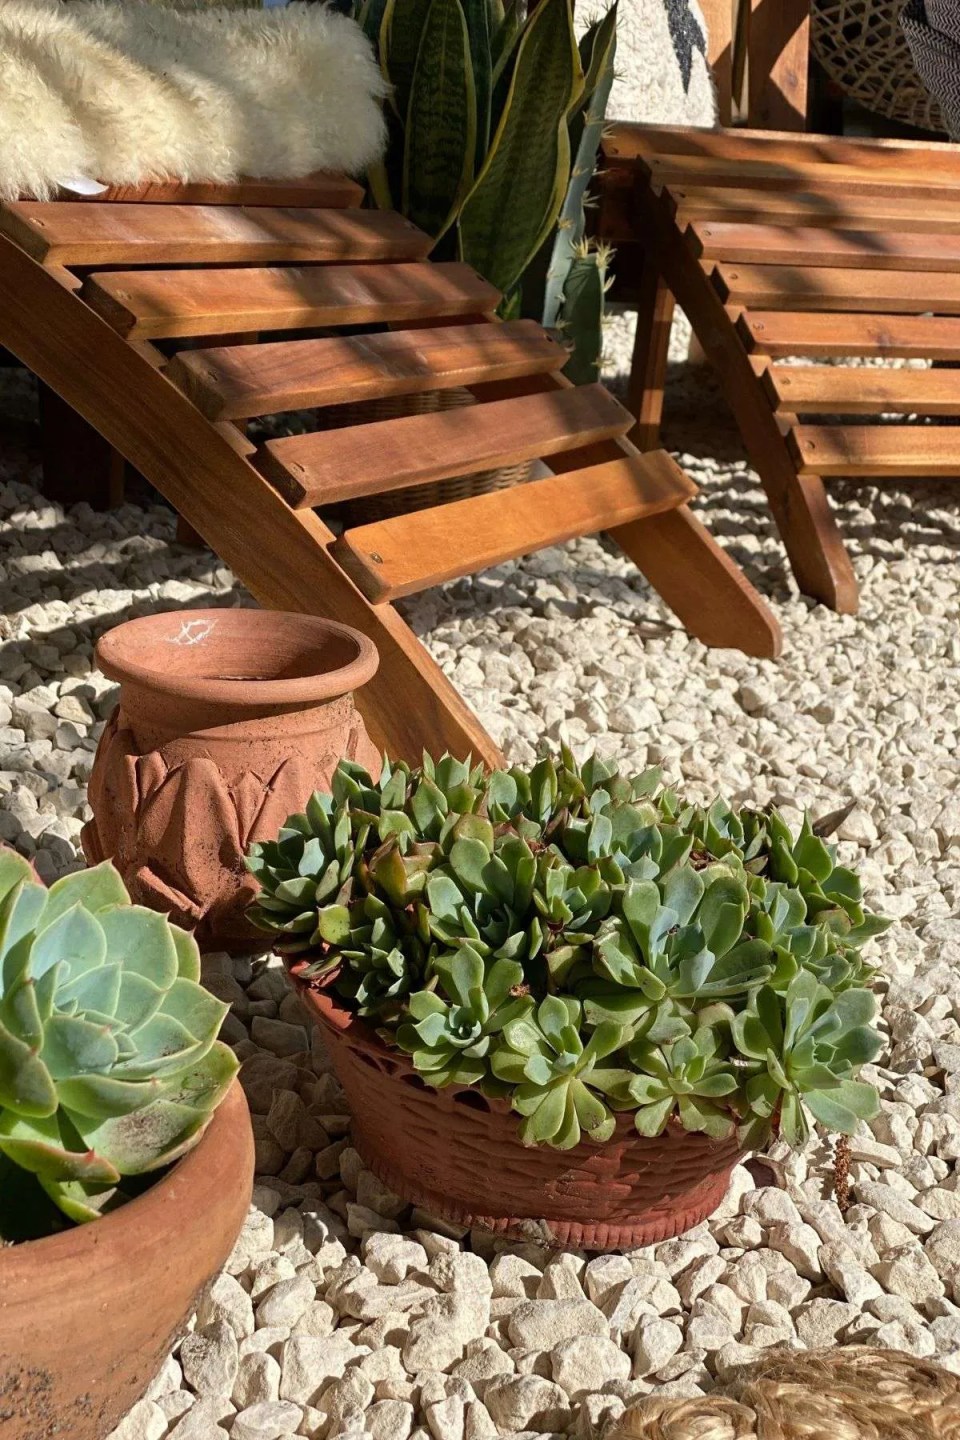 white gravel in a garden with adirondack chairs and terracotta pots